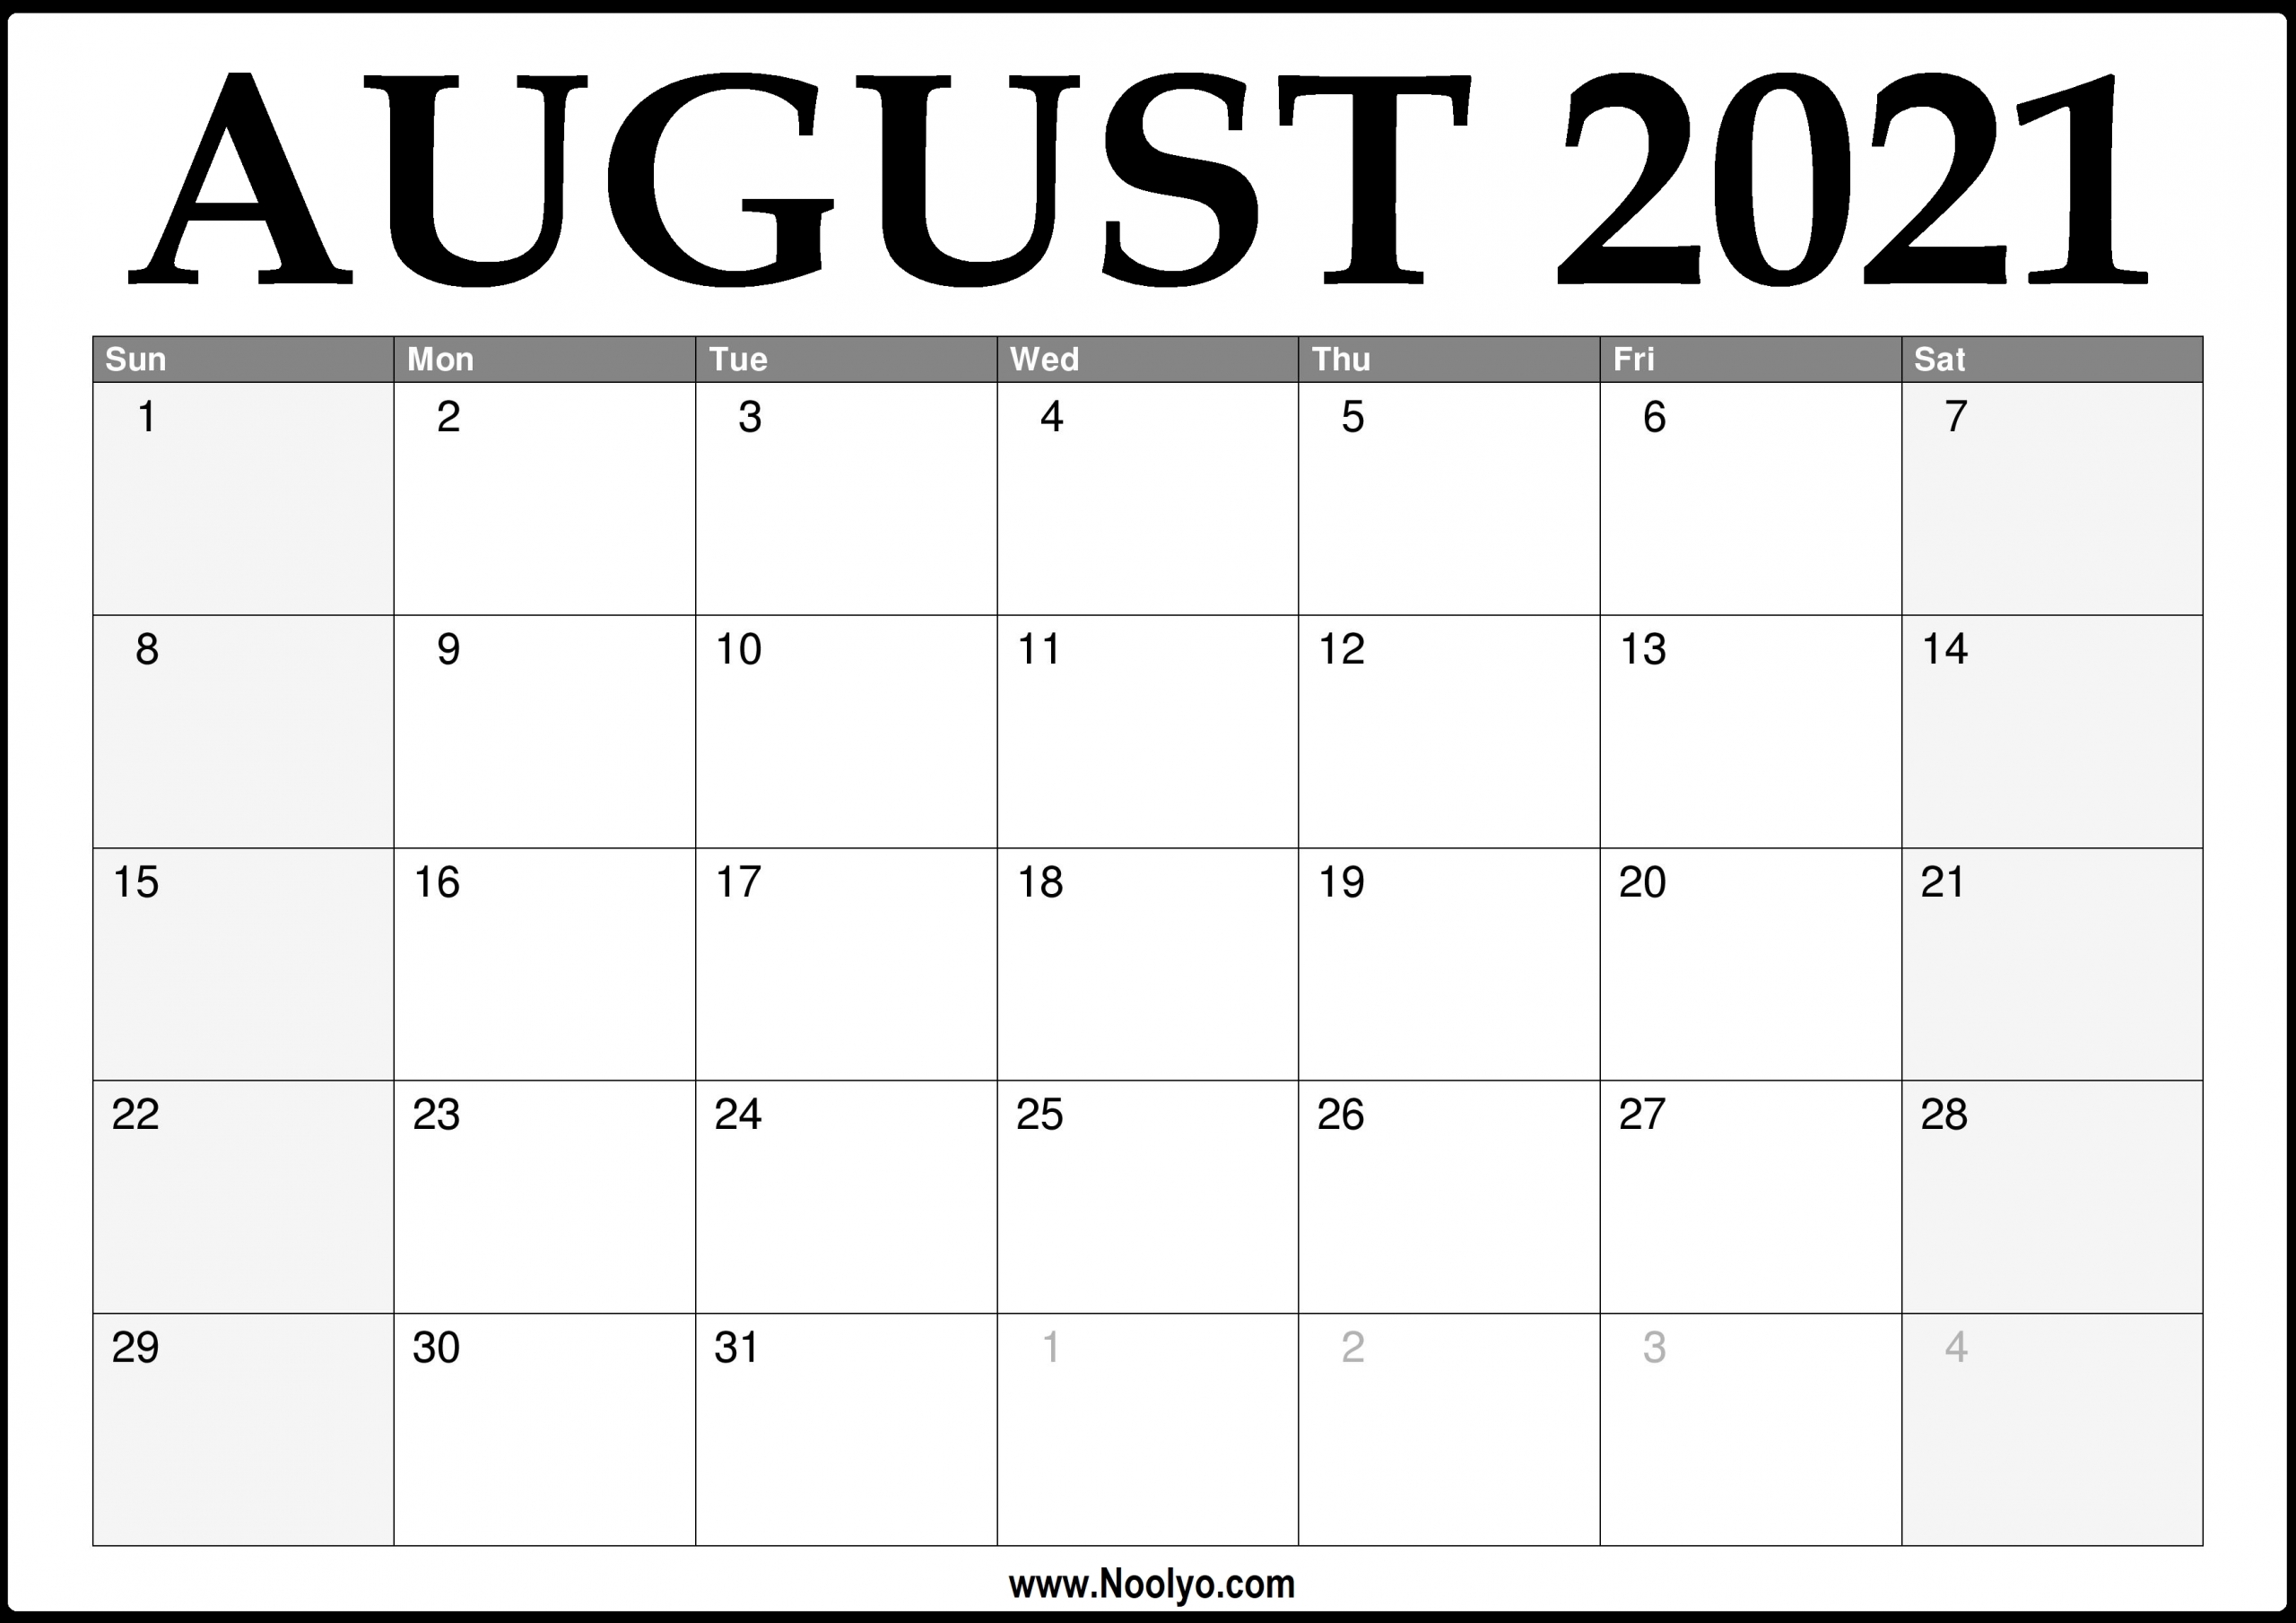 Perfect 2021 Calendar Images With Lines | Get Your Calendar Printable August 2021 Calendar To Print